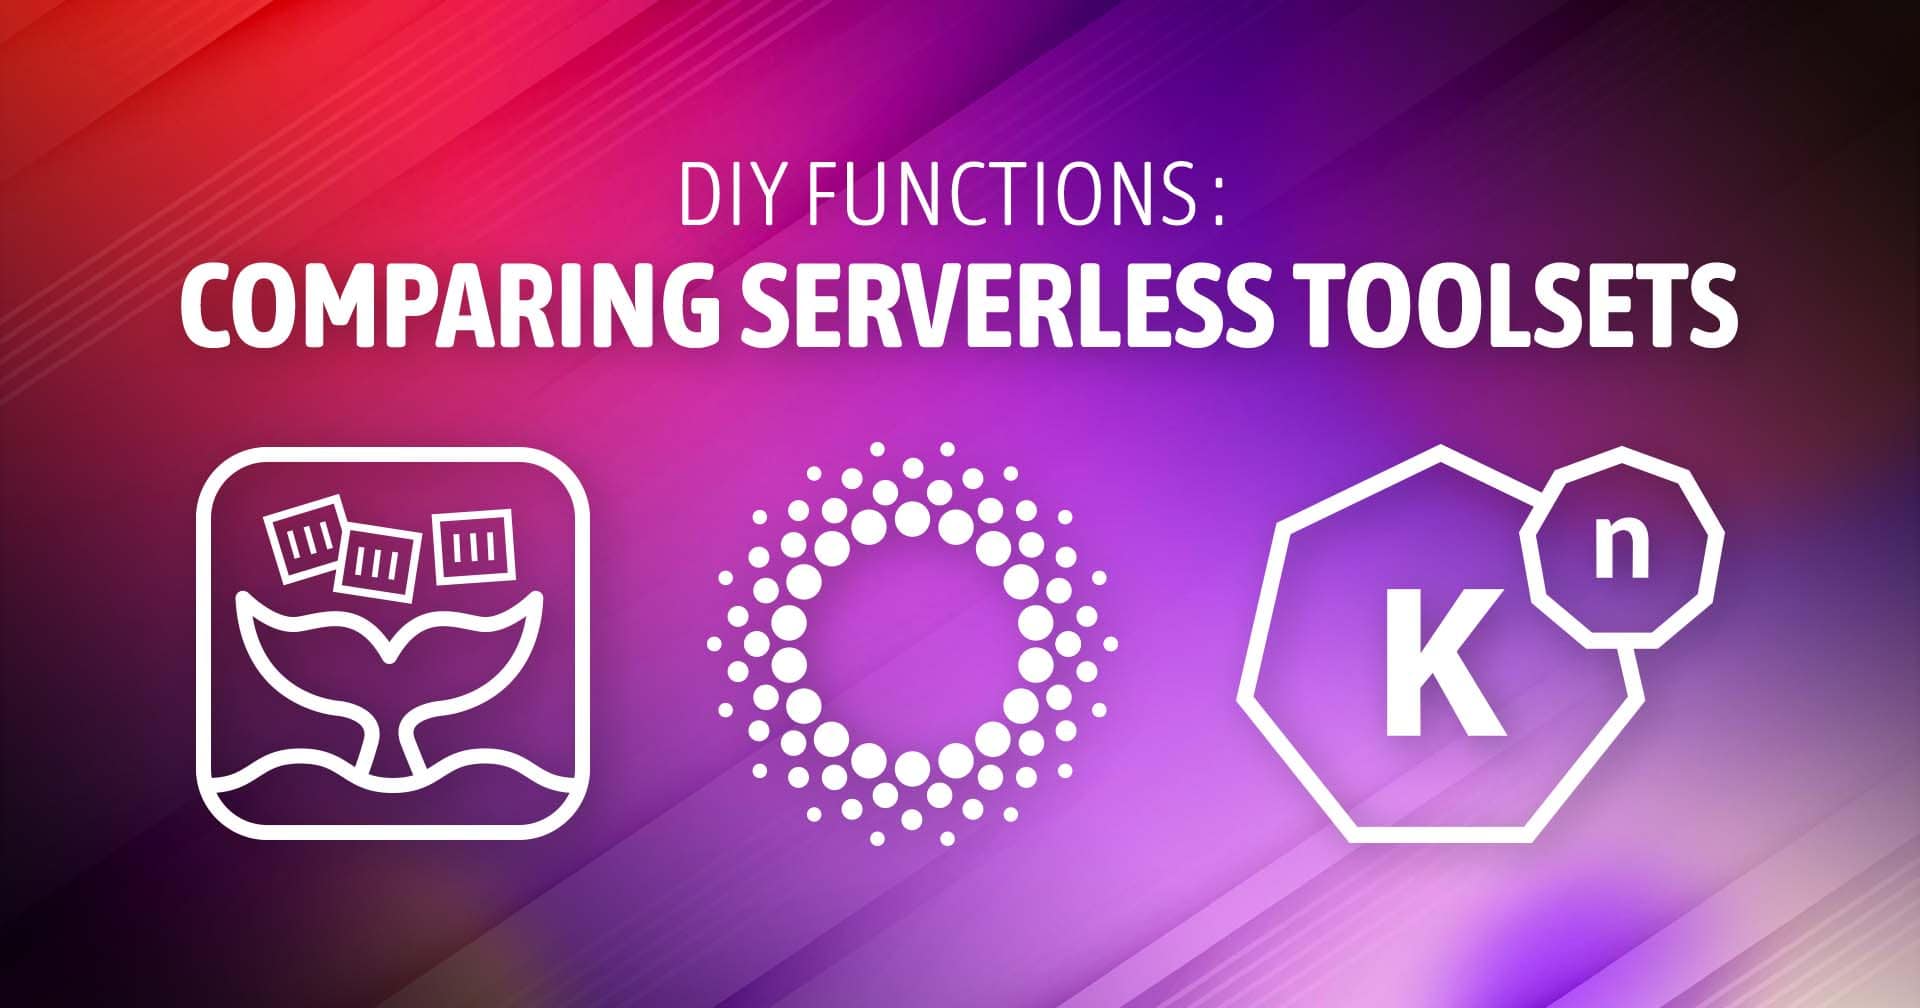 DIY-Functions-Comparing-Serverless-Toolsets